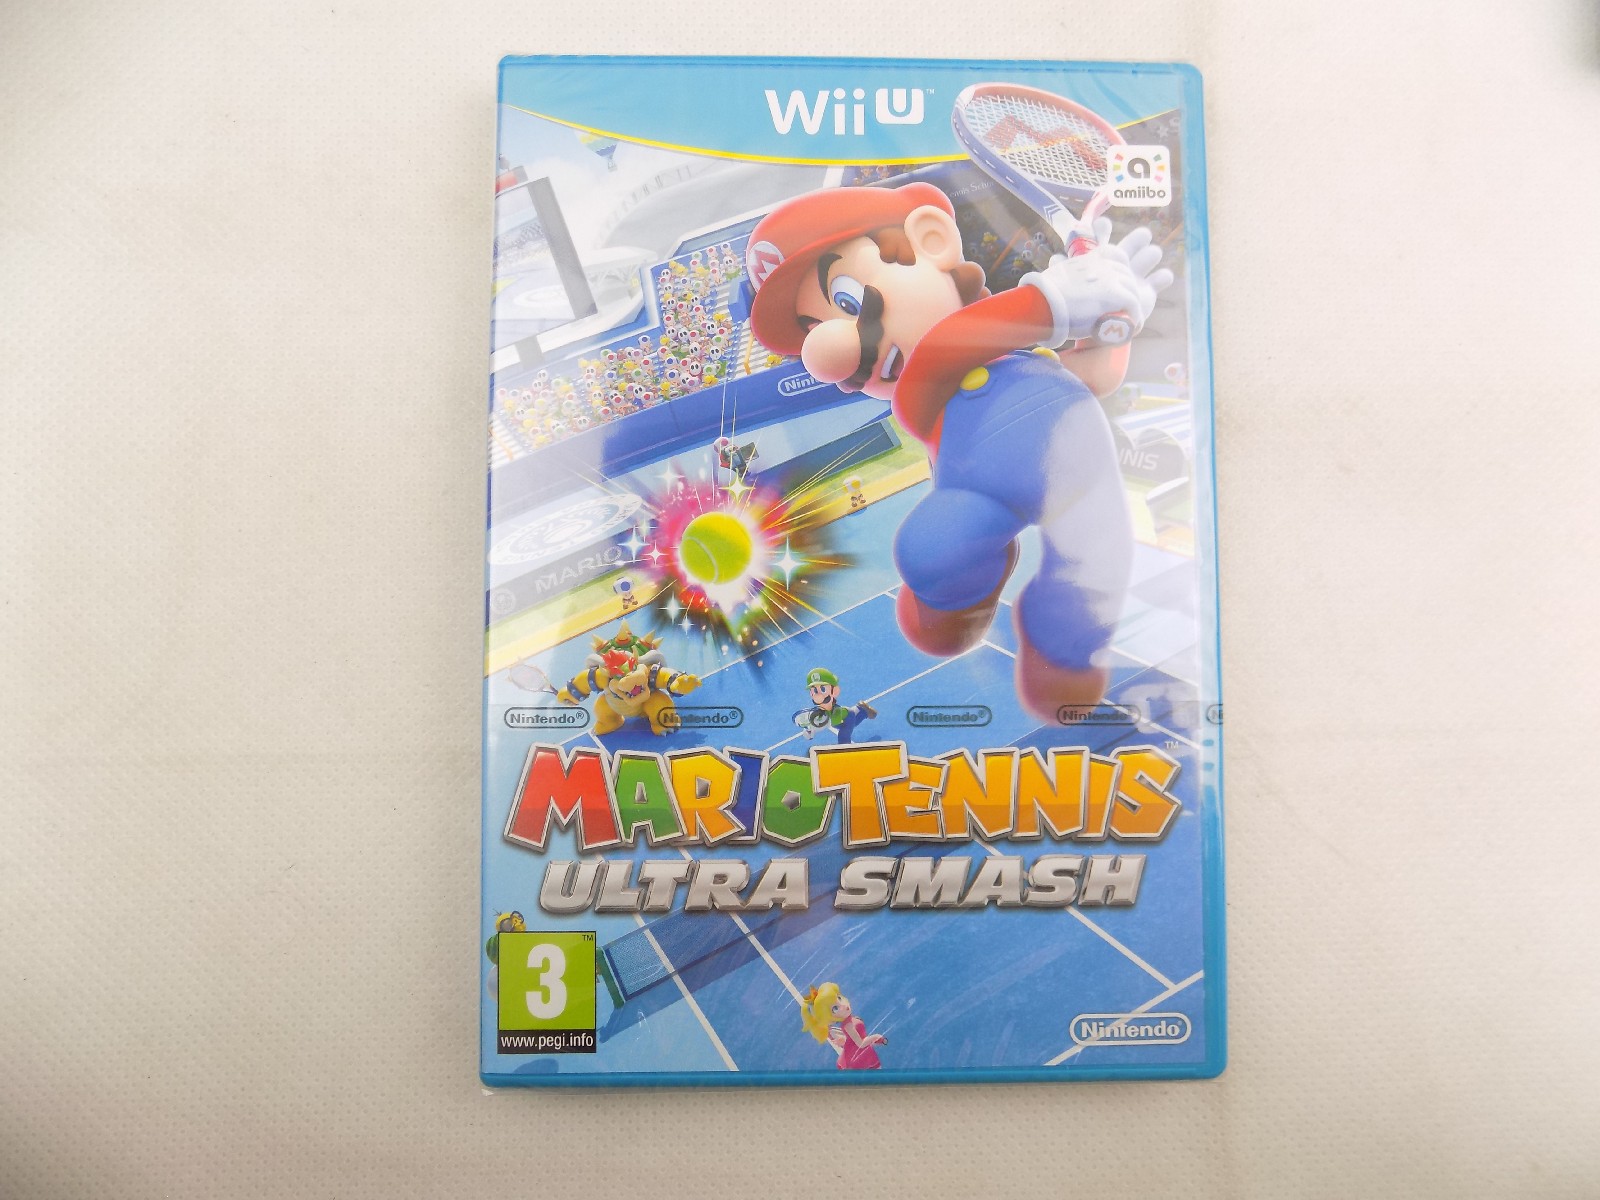 Brand New And Sealed Nintendo Wii U Mario Tennis Ultra Smash Free Postage Starboard Games 2378